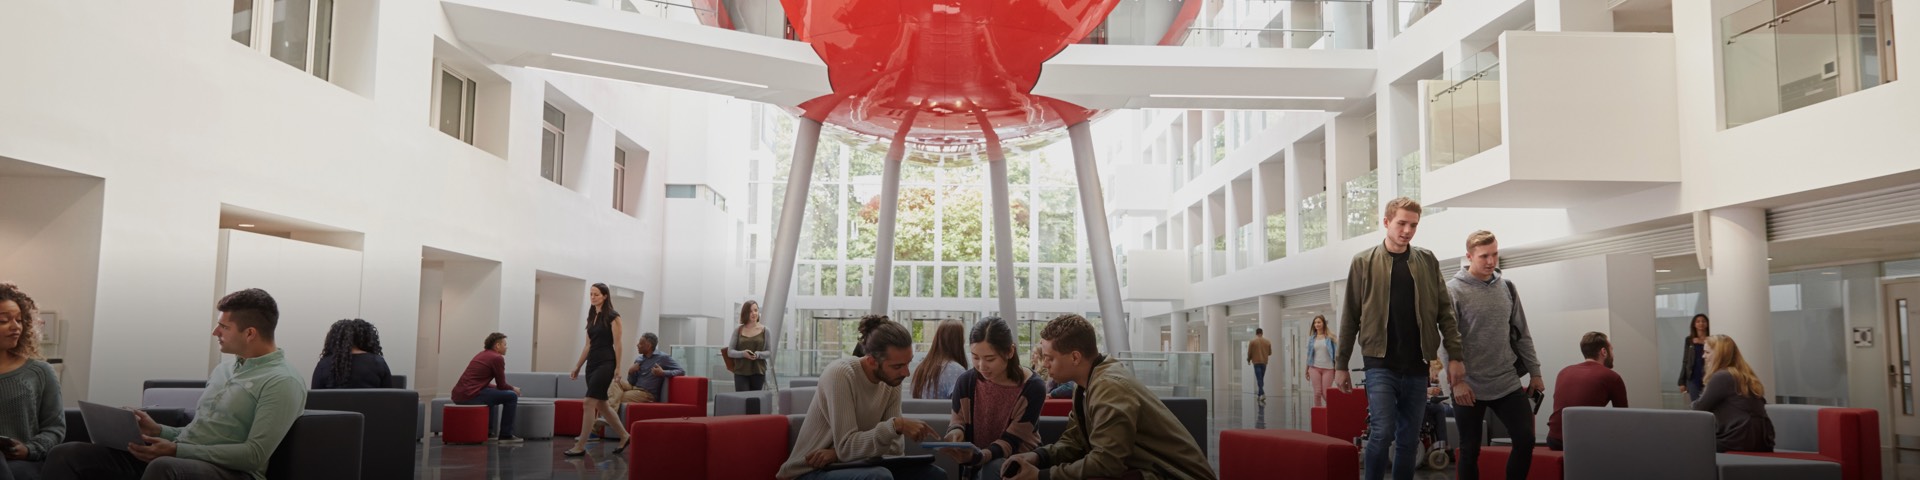 Students in The Spark with the Pod in the background